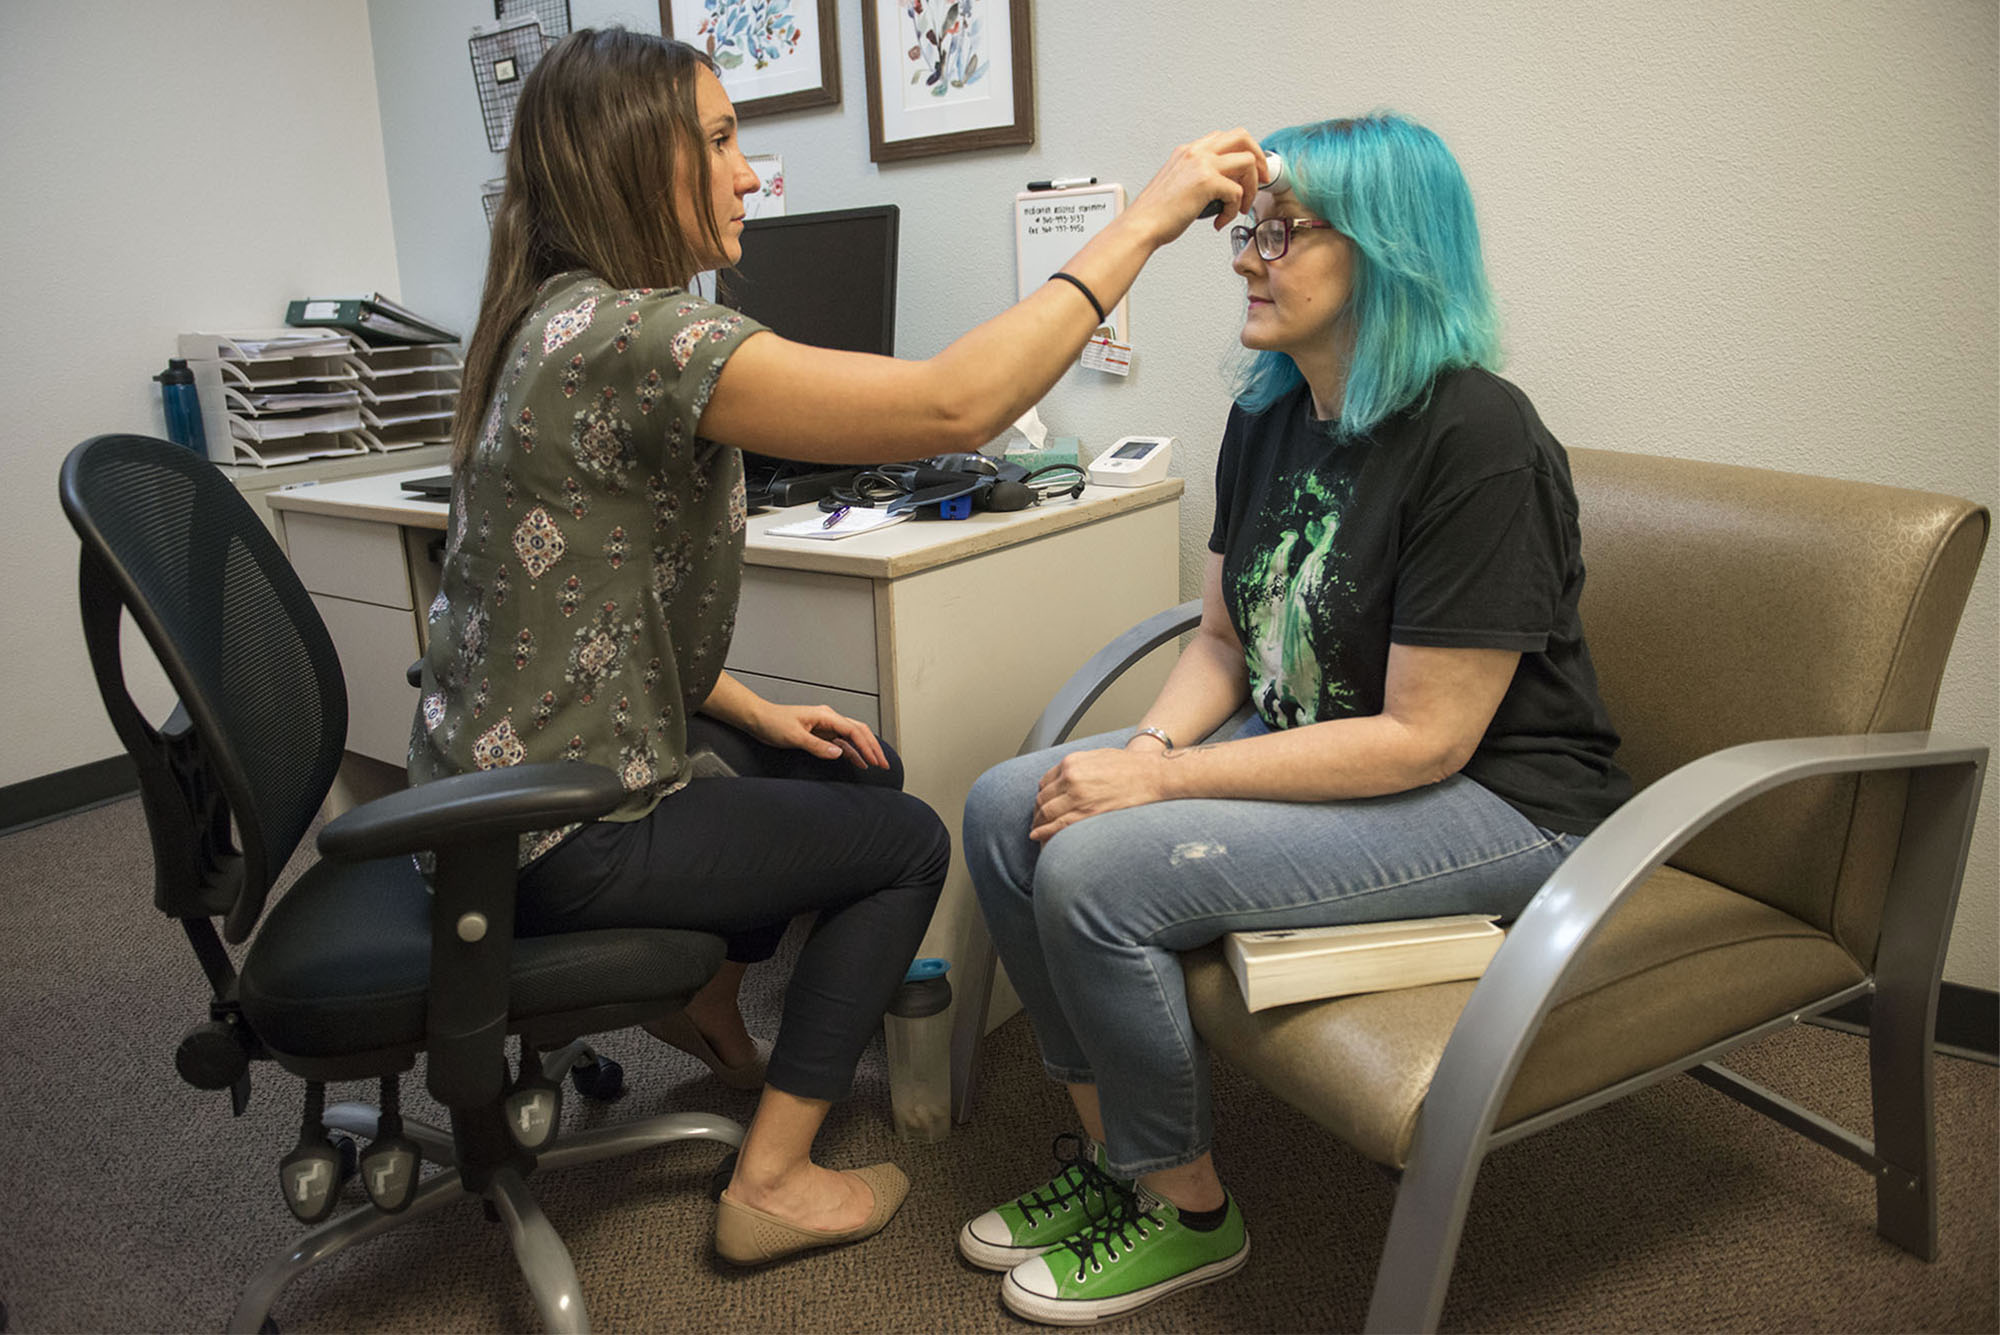  Nurse Care Manager Lessa Mercer at Columbia River Mental Health Services takes Timberly Eyssen's temperature during a medical checkup to track how the Suboxone is working for Eyssen on Monday, July 9, 2018.  